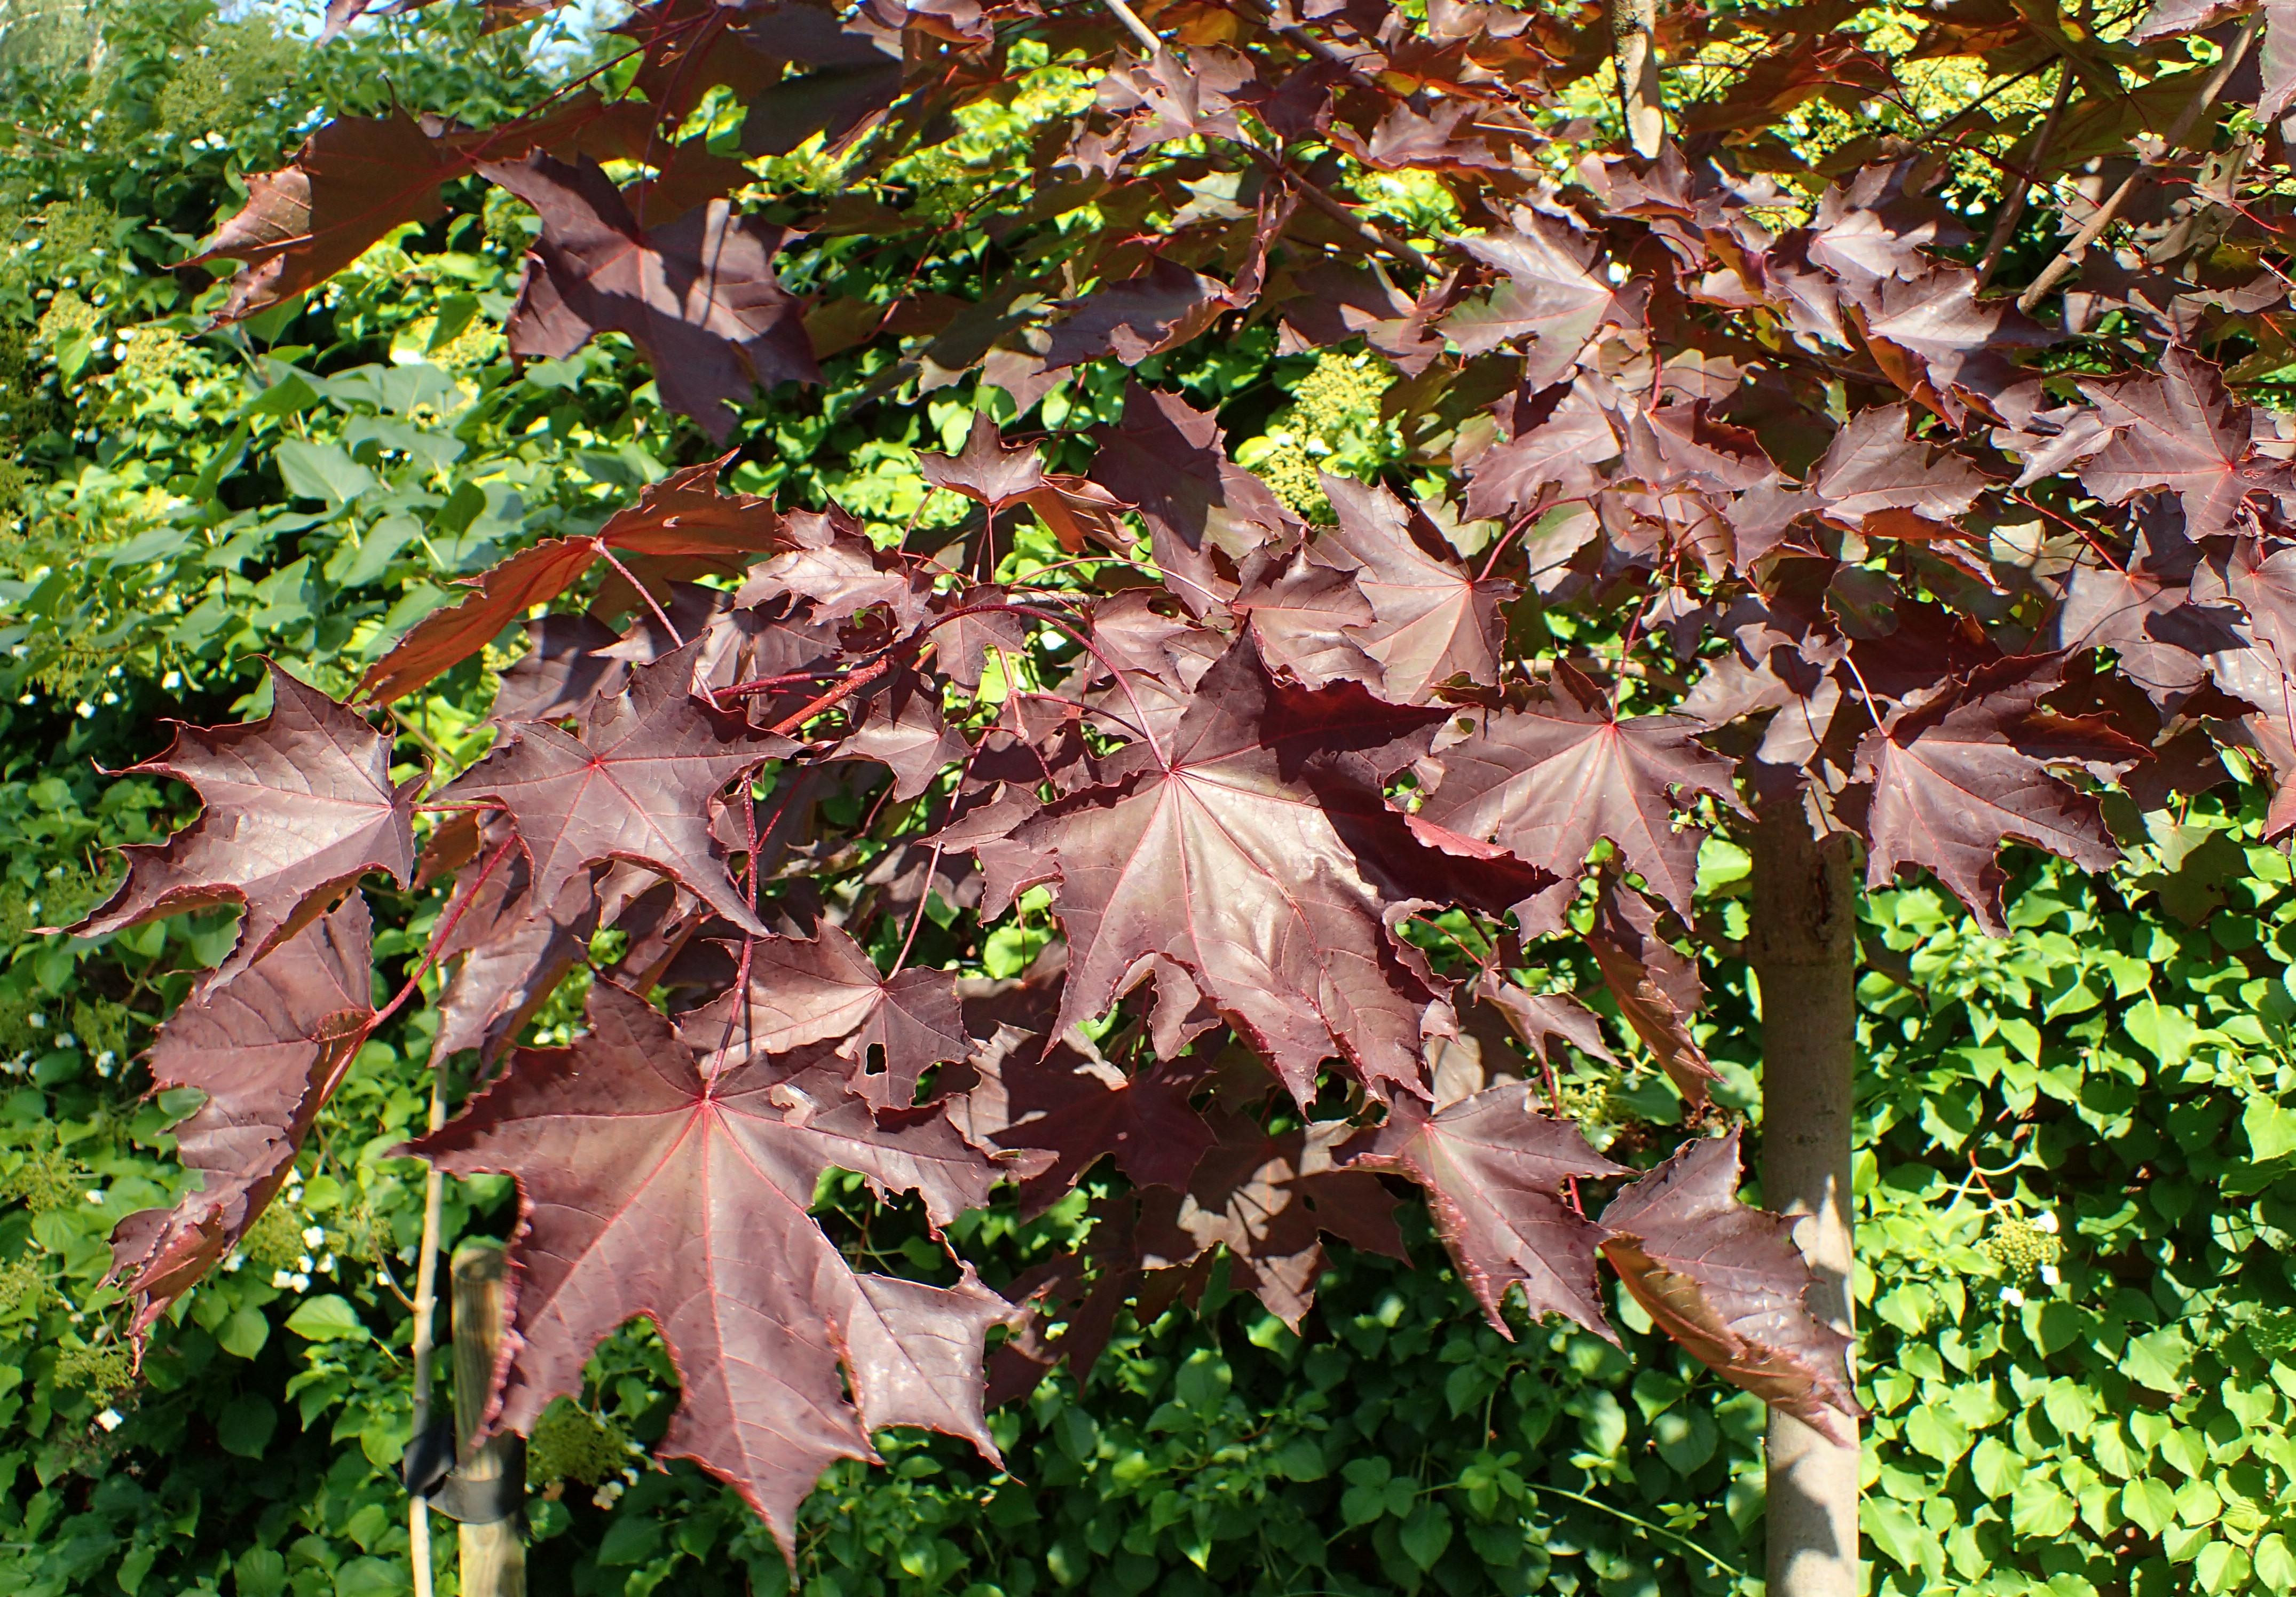 burgundy leaves with burgundy-red stems